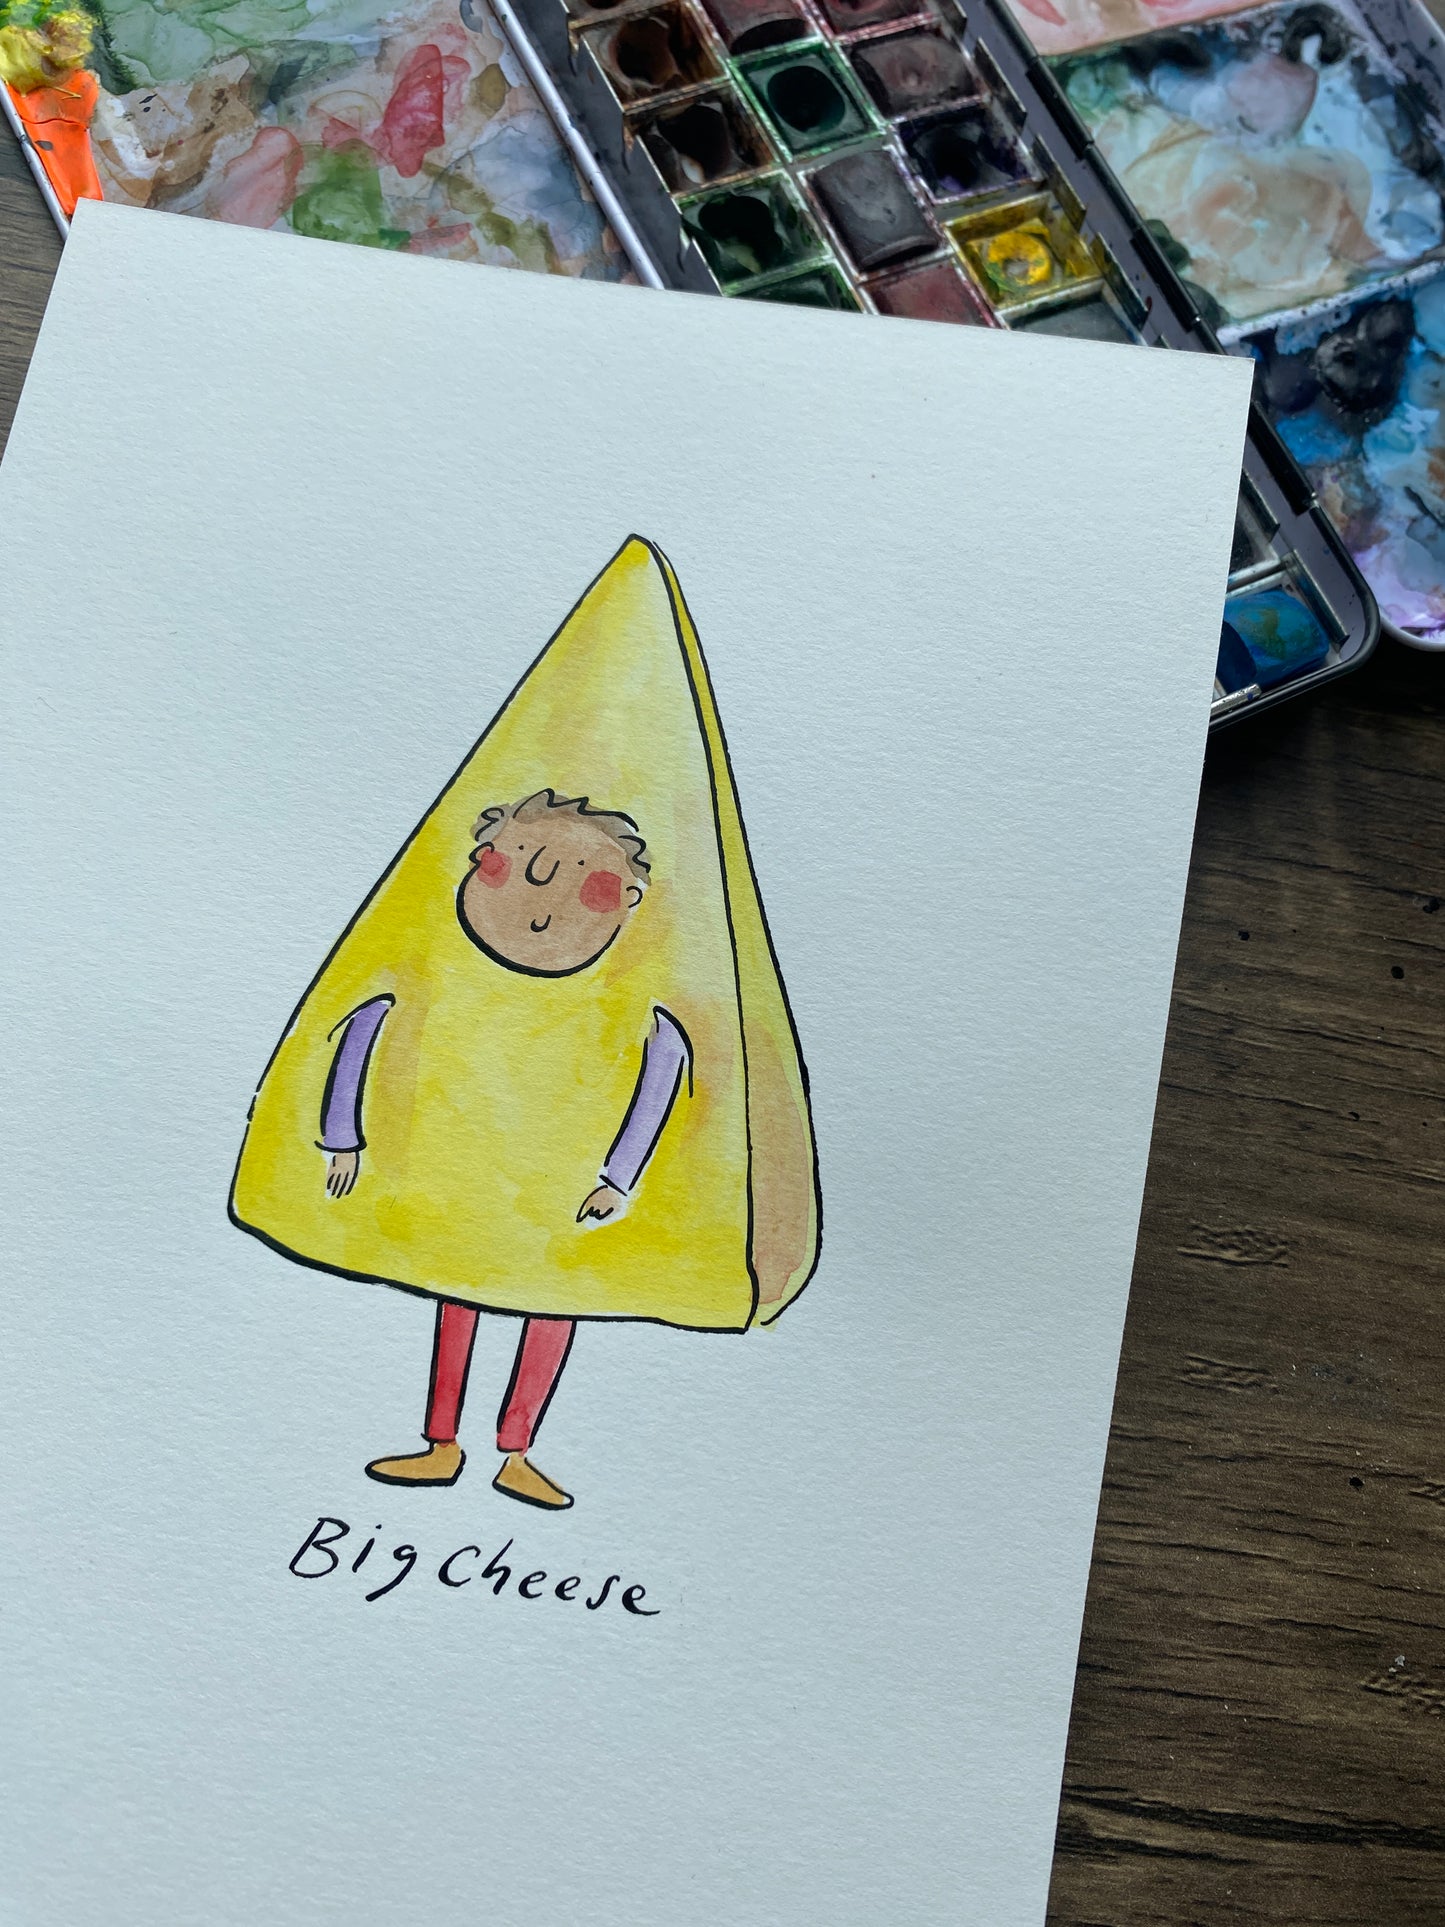 Big Cheese original pen and ink and watercolour illustration by Rosie Brooks